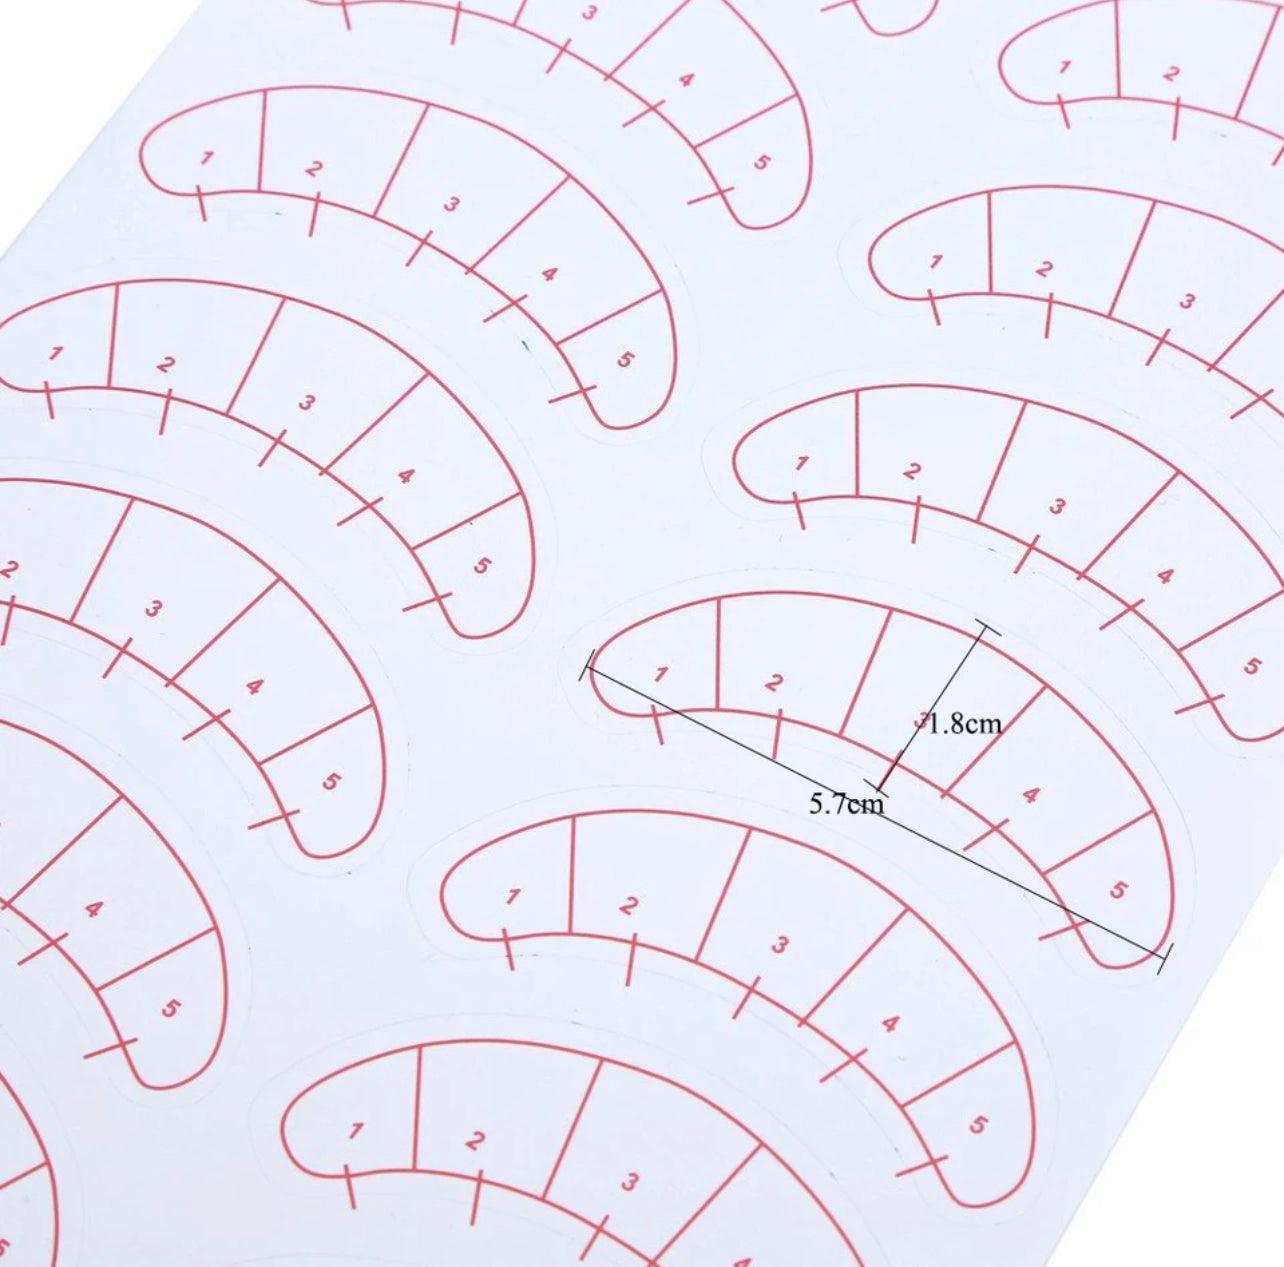 Lash Mapping Sticker Practice Eye Pads 70 Pairs - Giali Lashes 